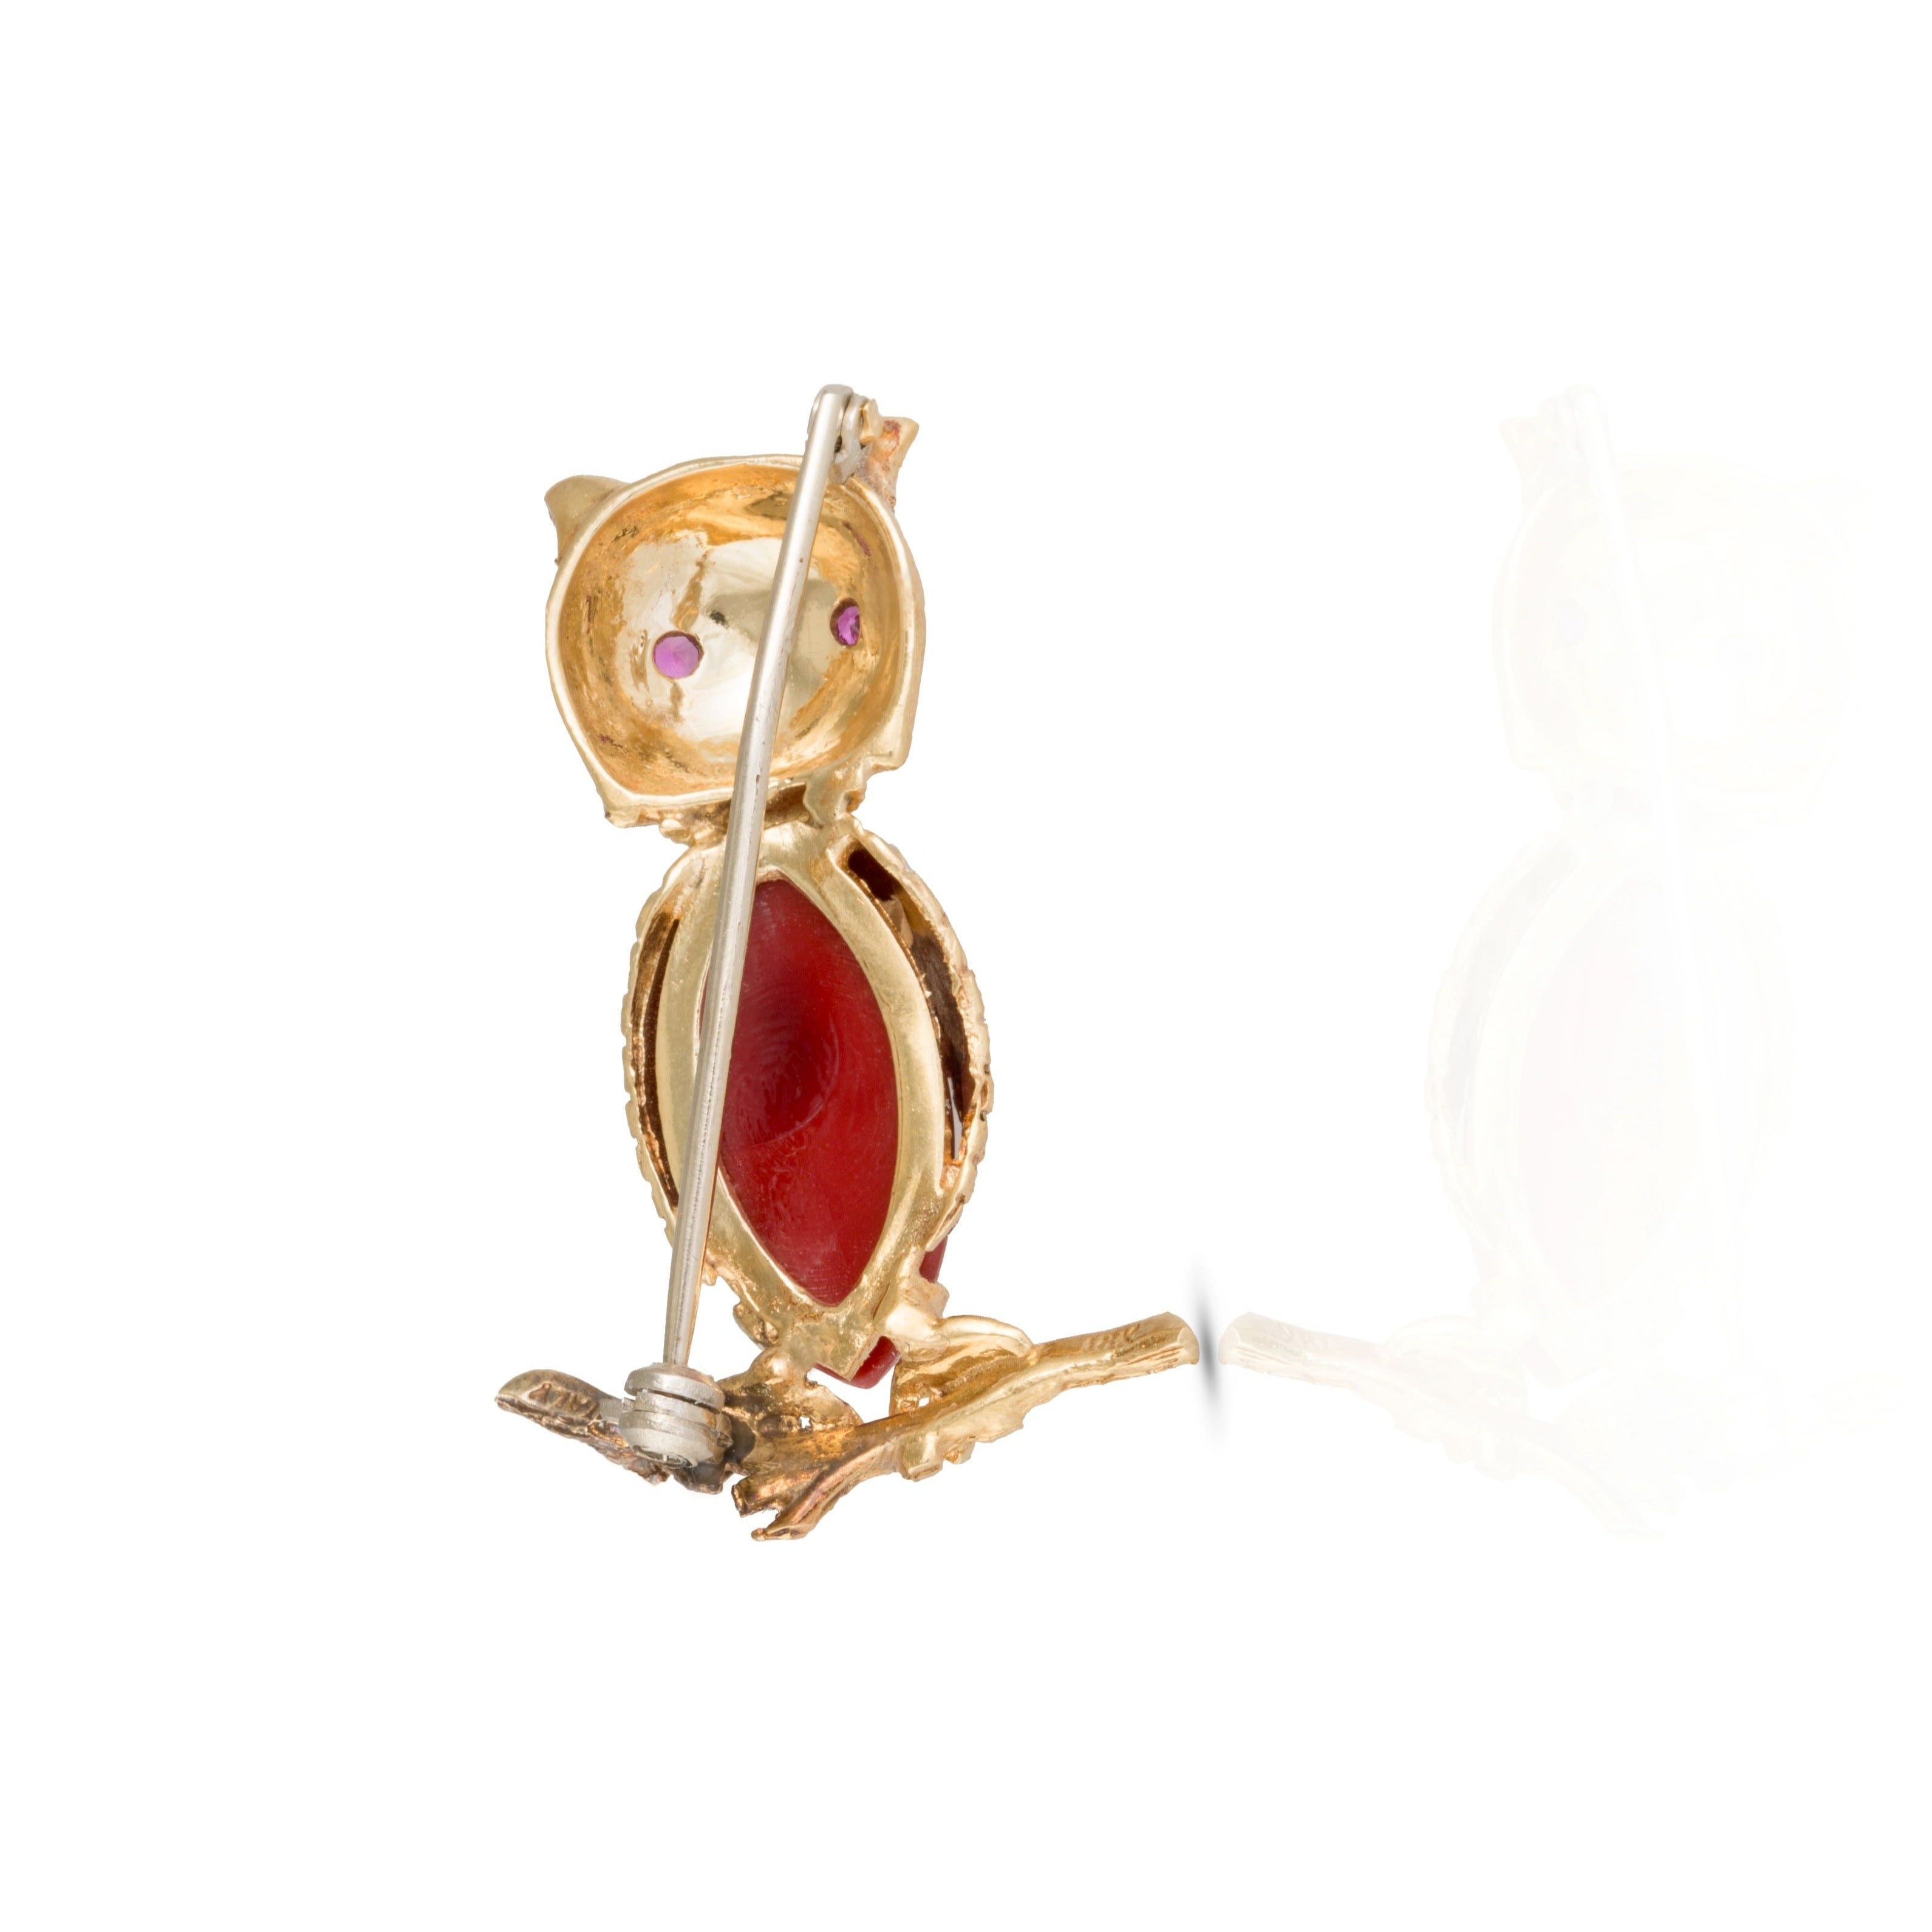 Closure side of gold, glass, and ruby brooch.